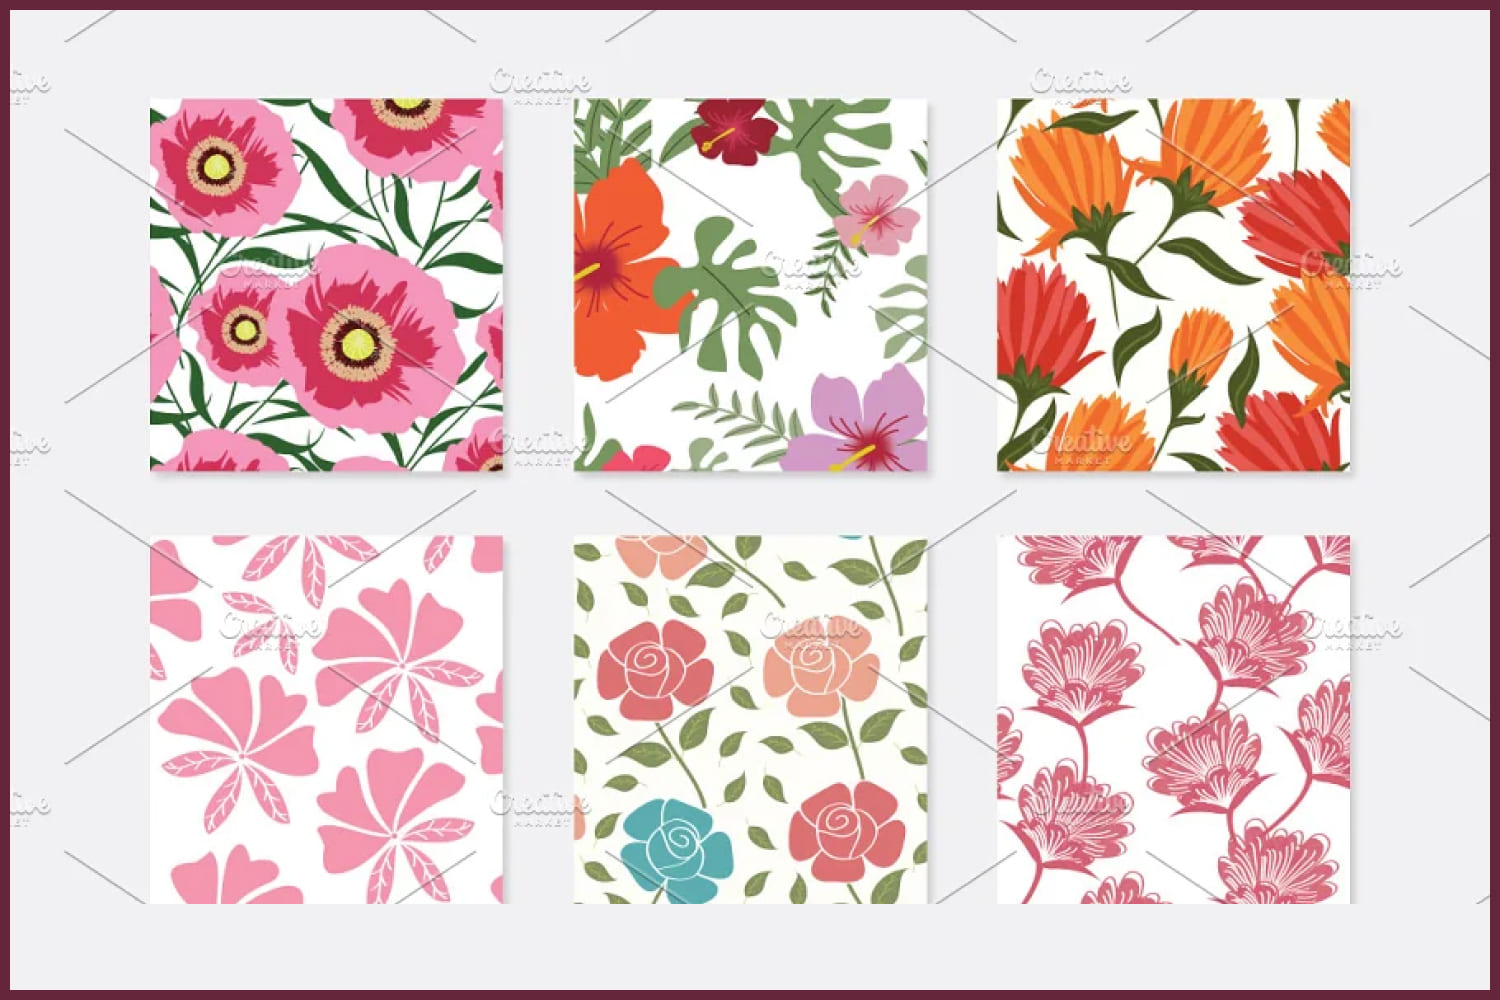 Collage of patterns with colorful flowers.